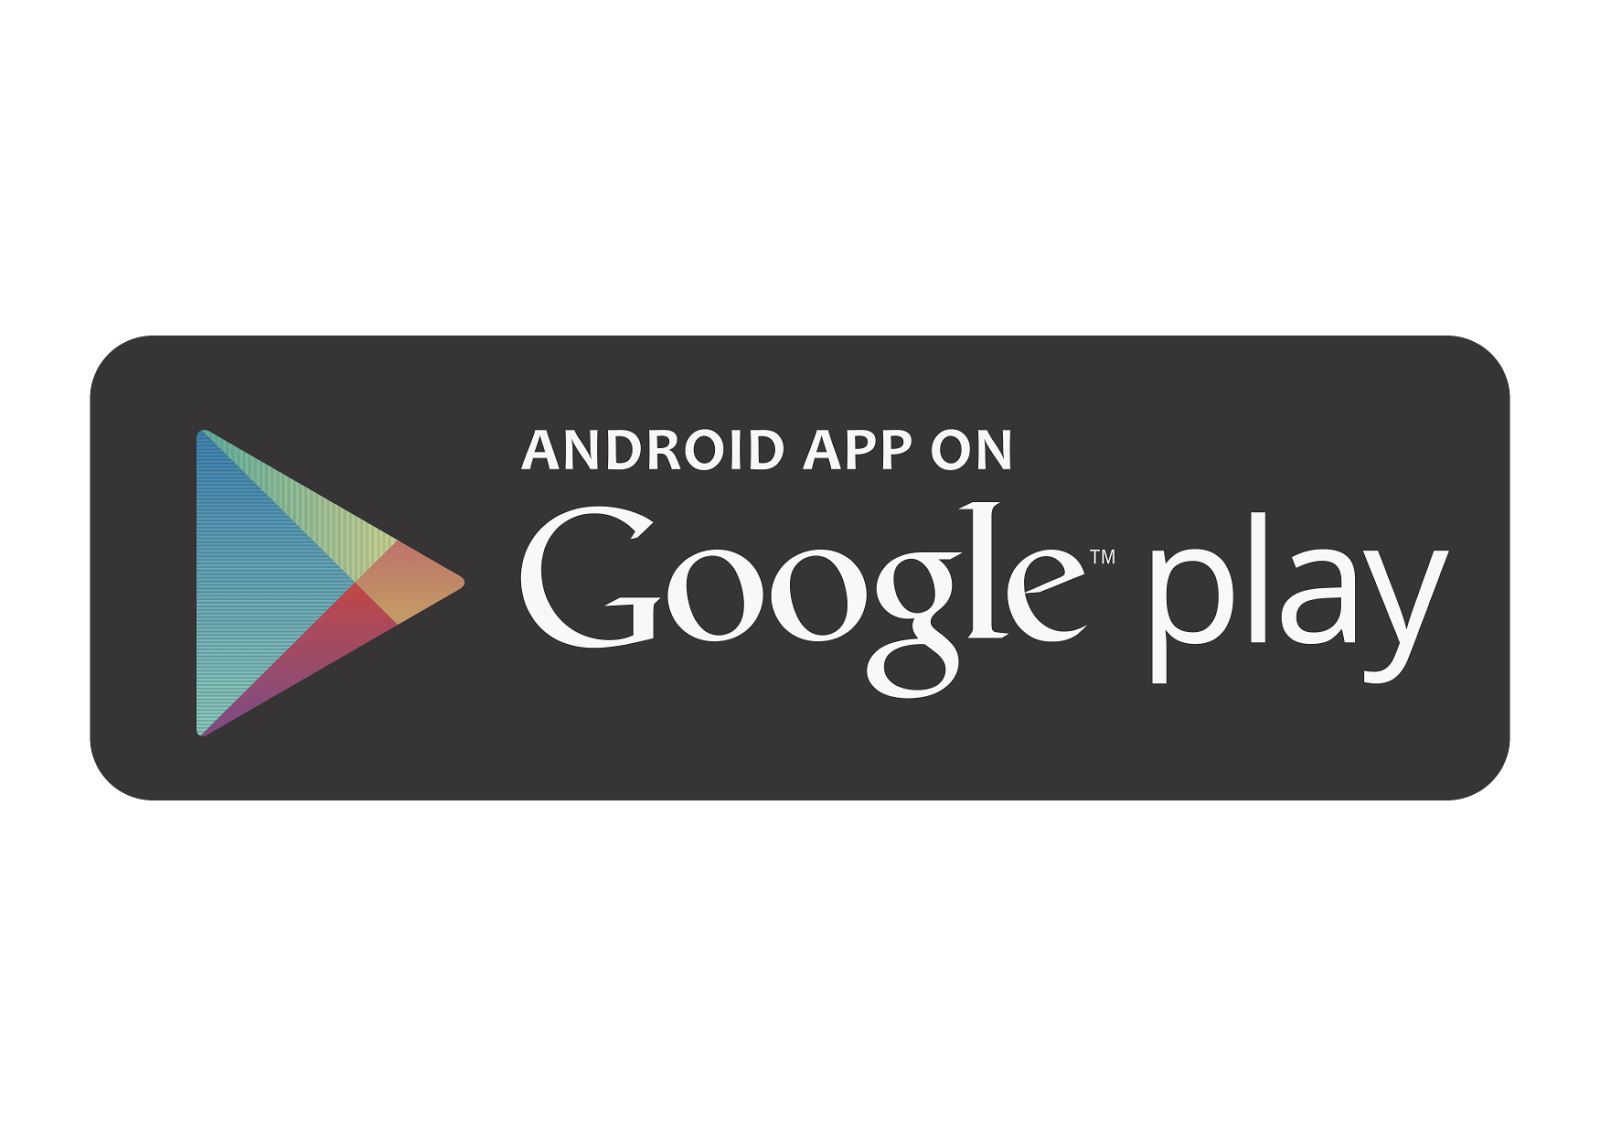 Andriod App On Google Play Logo - Android app on google play Logo Vector | Vector logo download | App ...